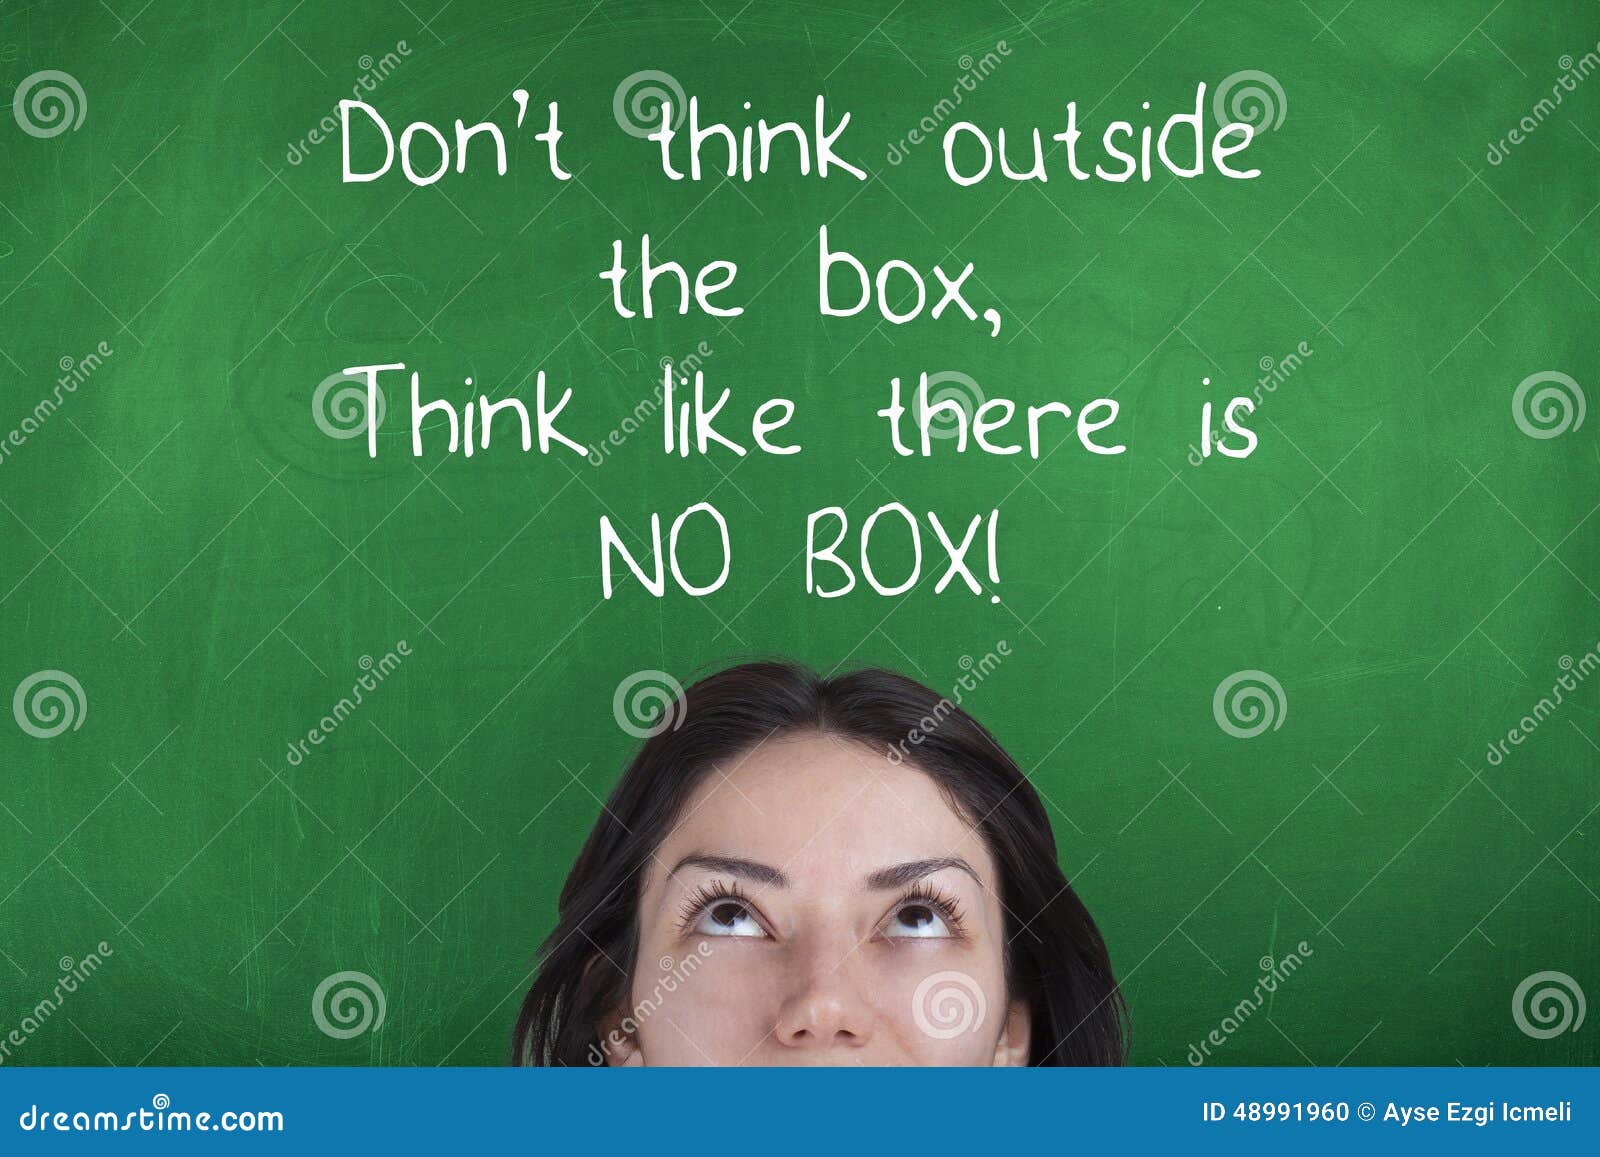 don't think outside the box, think like there is no box, motivating business phrase